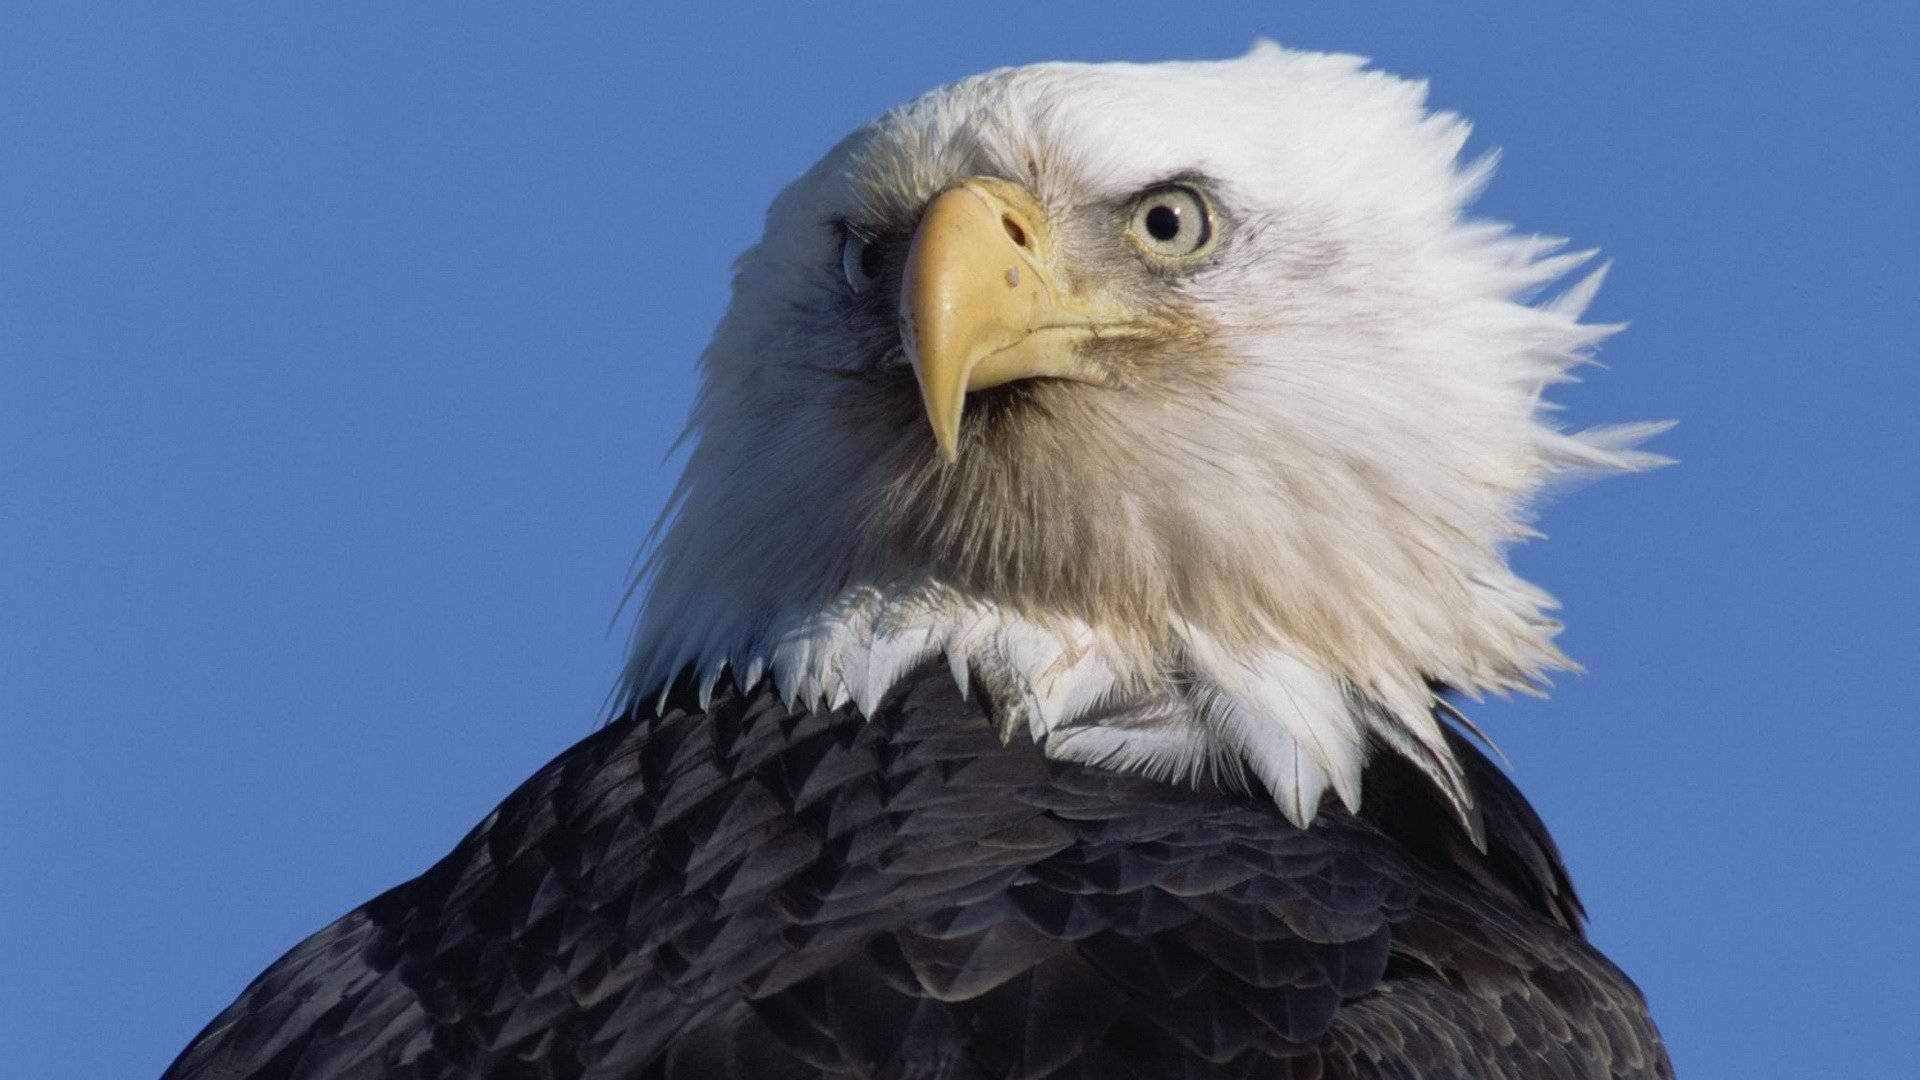 Mobile Desktop Background Hd Picture Of The Bald Eagle